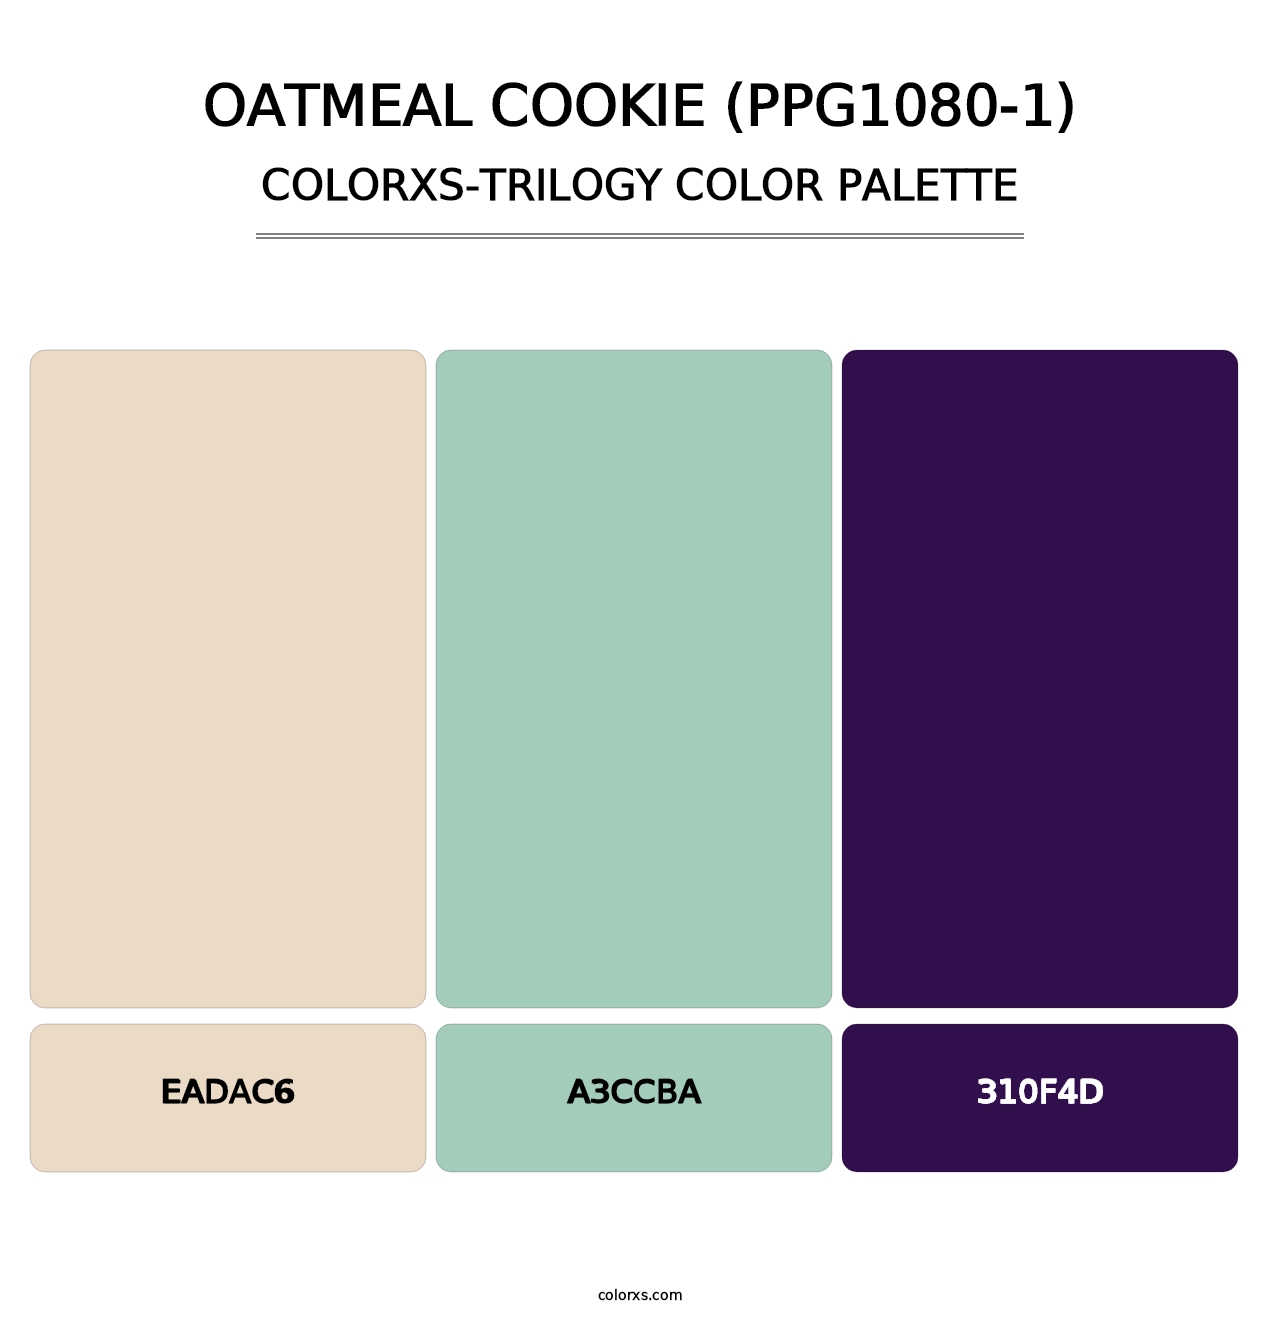 Oatmeal Cookie (PPG1080-1) - Colorxs Trilogy Palette